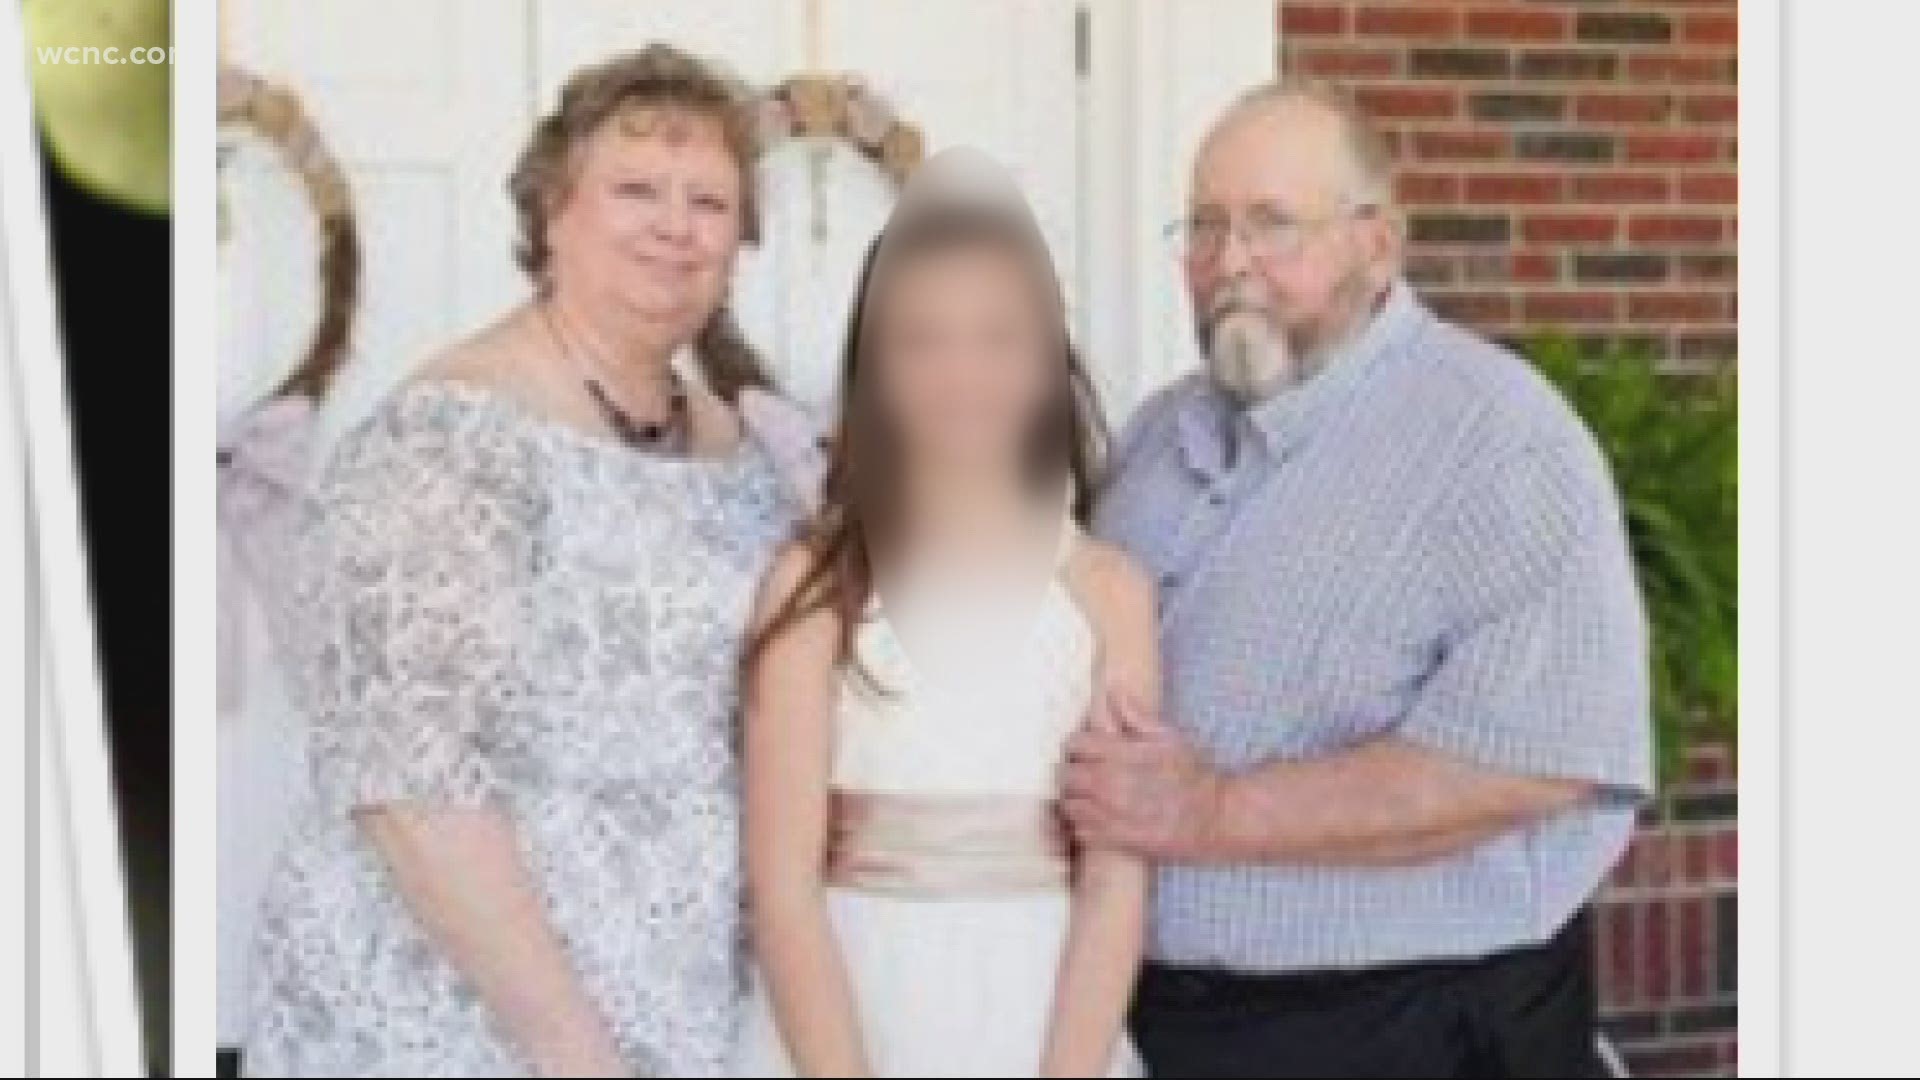 Lora and David passed away from COVID-19 complications on Saturday. The couple was married for 40 years, and leave behind their 14-year-old daughter.